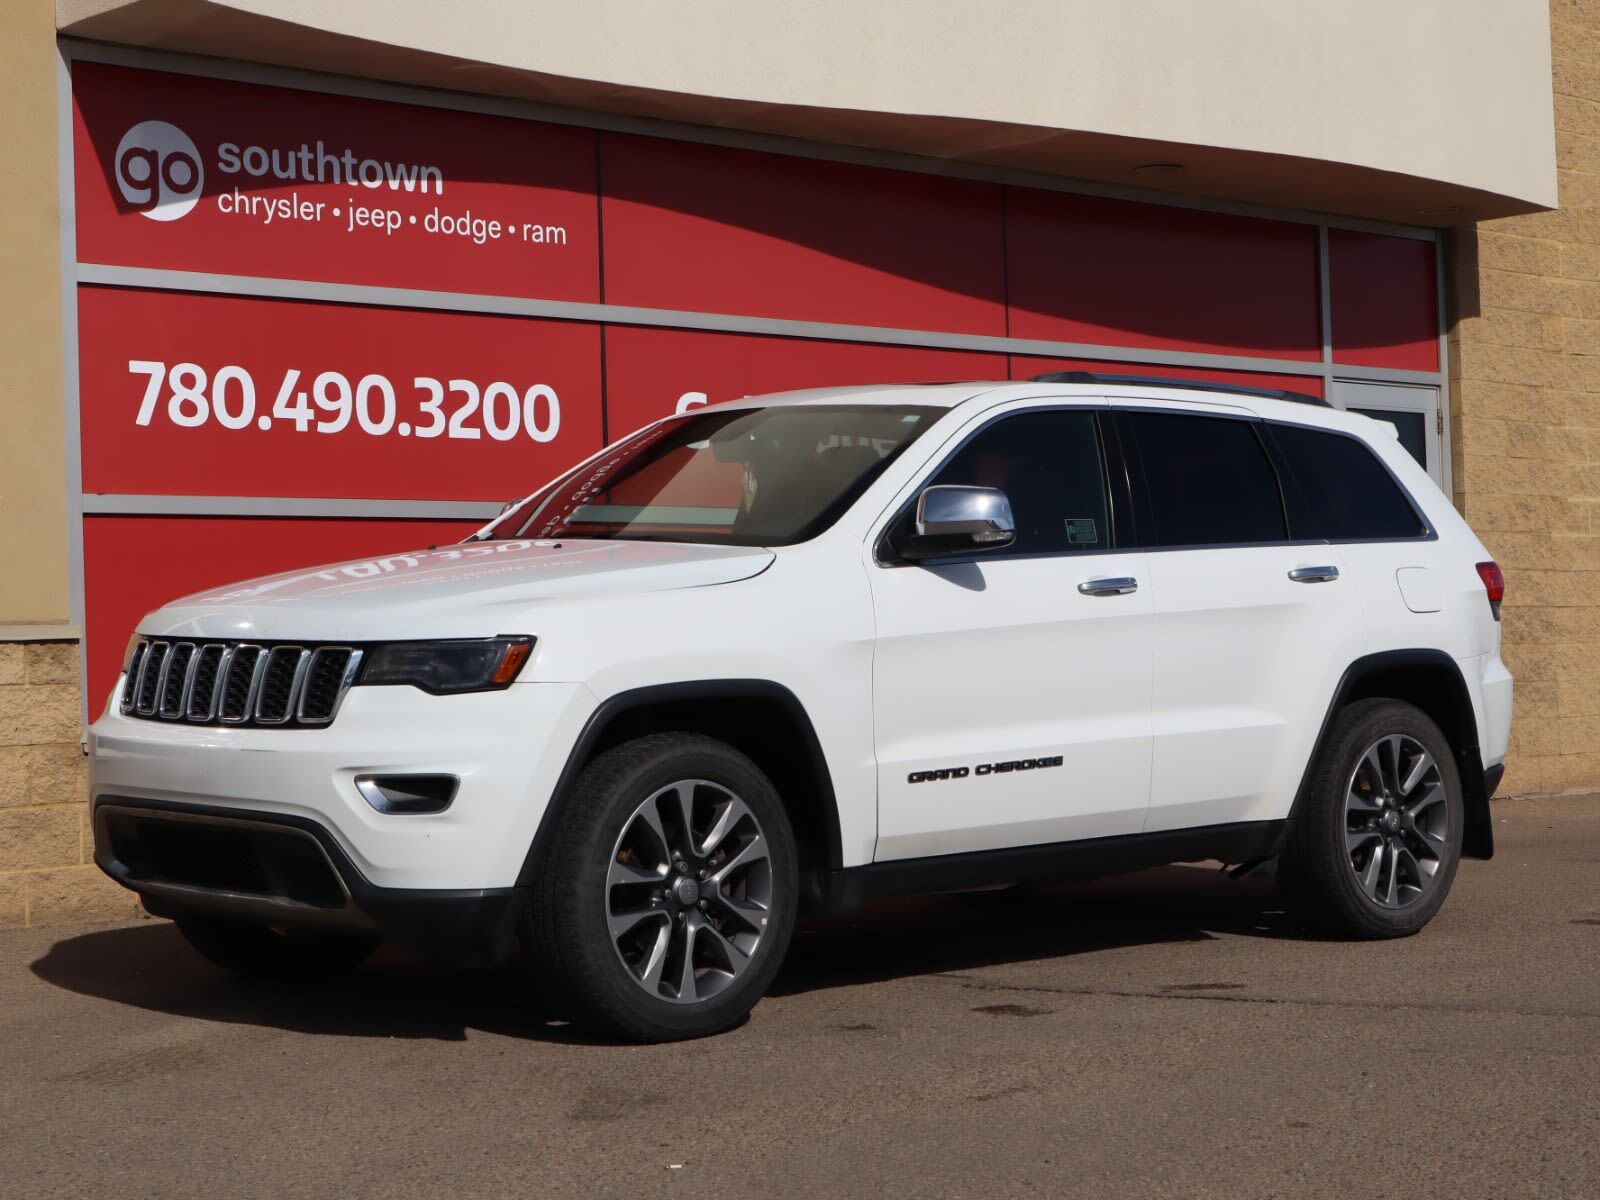 2018 Jeep Grand Cherokee LIMITED IN BRIGHT WHITE EQUIPPED WITH A 3.6L V6 , 